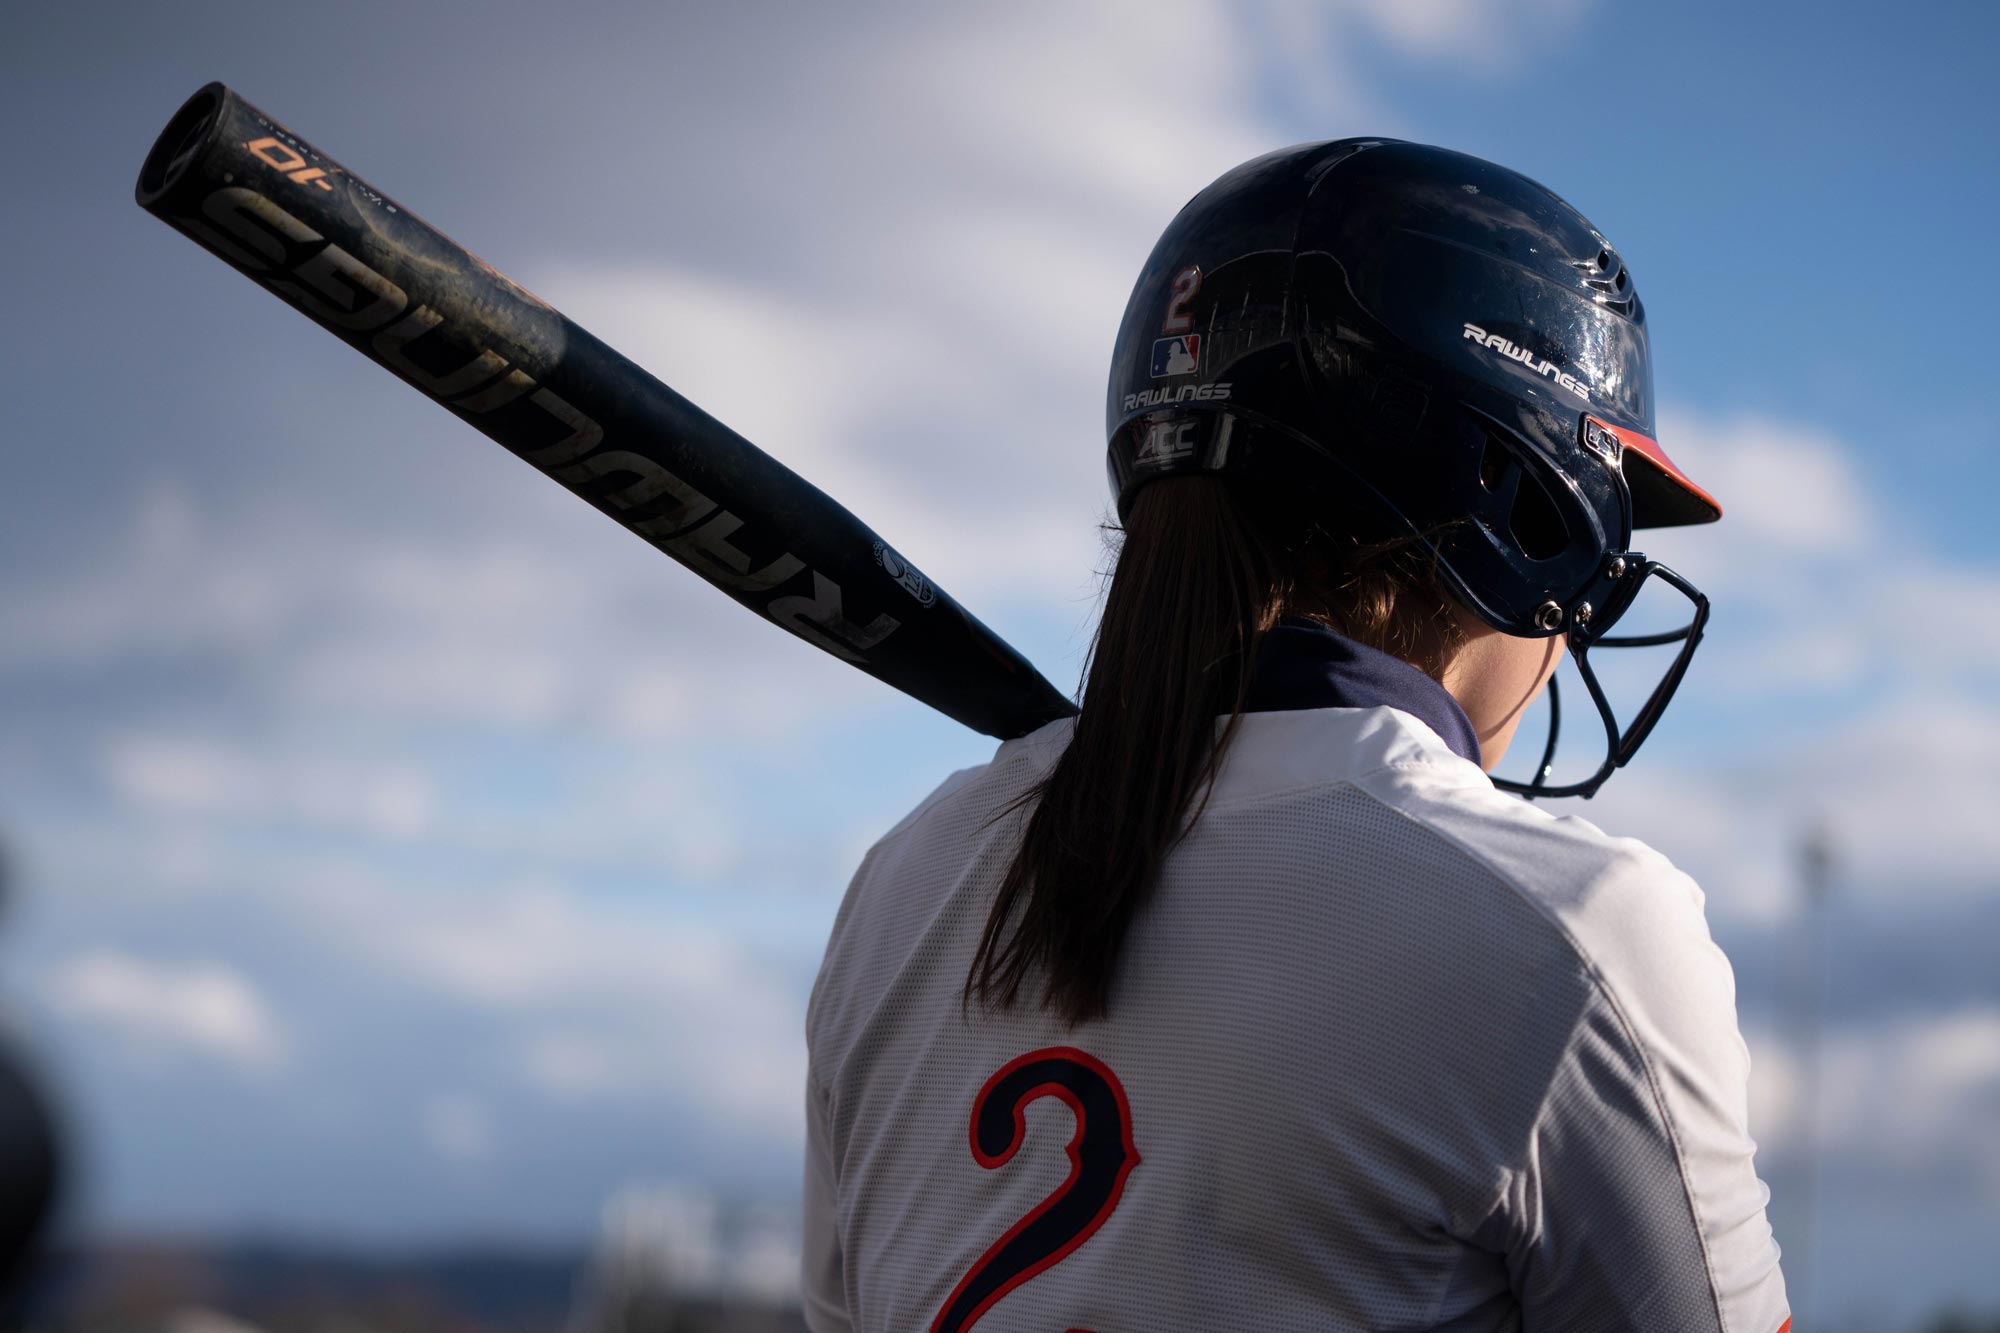 Softball player holding a bat during a game